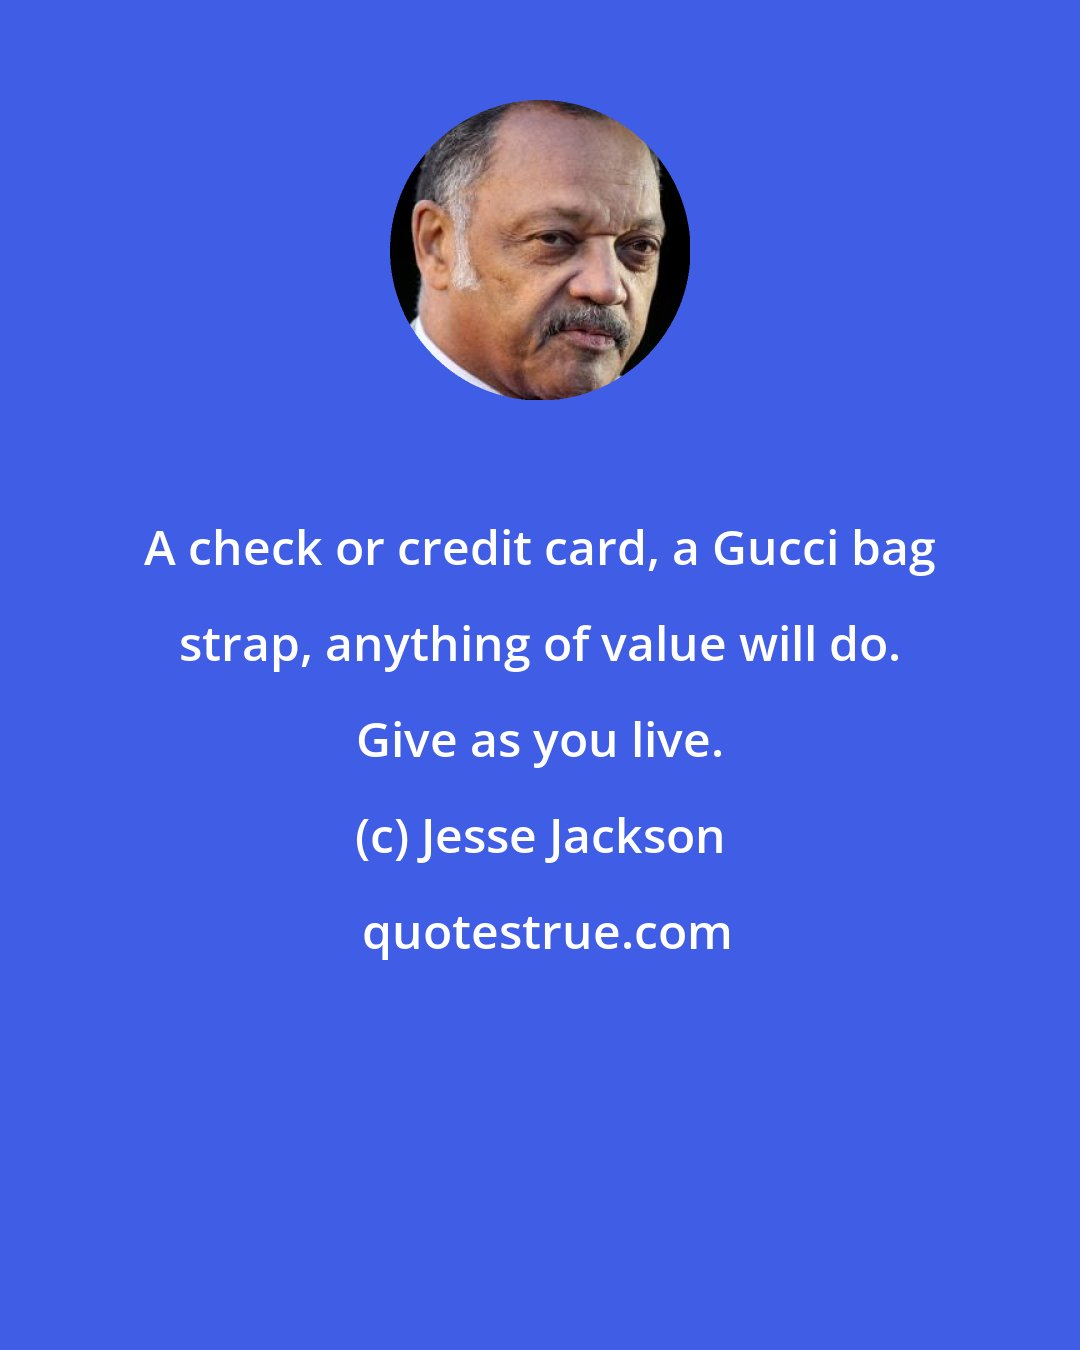 Jesse Jackson: A check or credit card, a Gucci bag strap, anything of value will do. Give as you live.